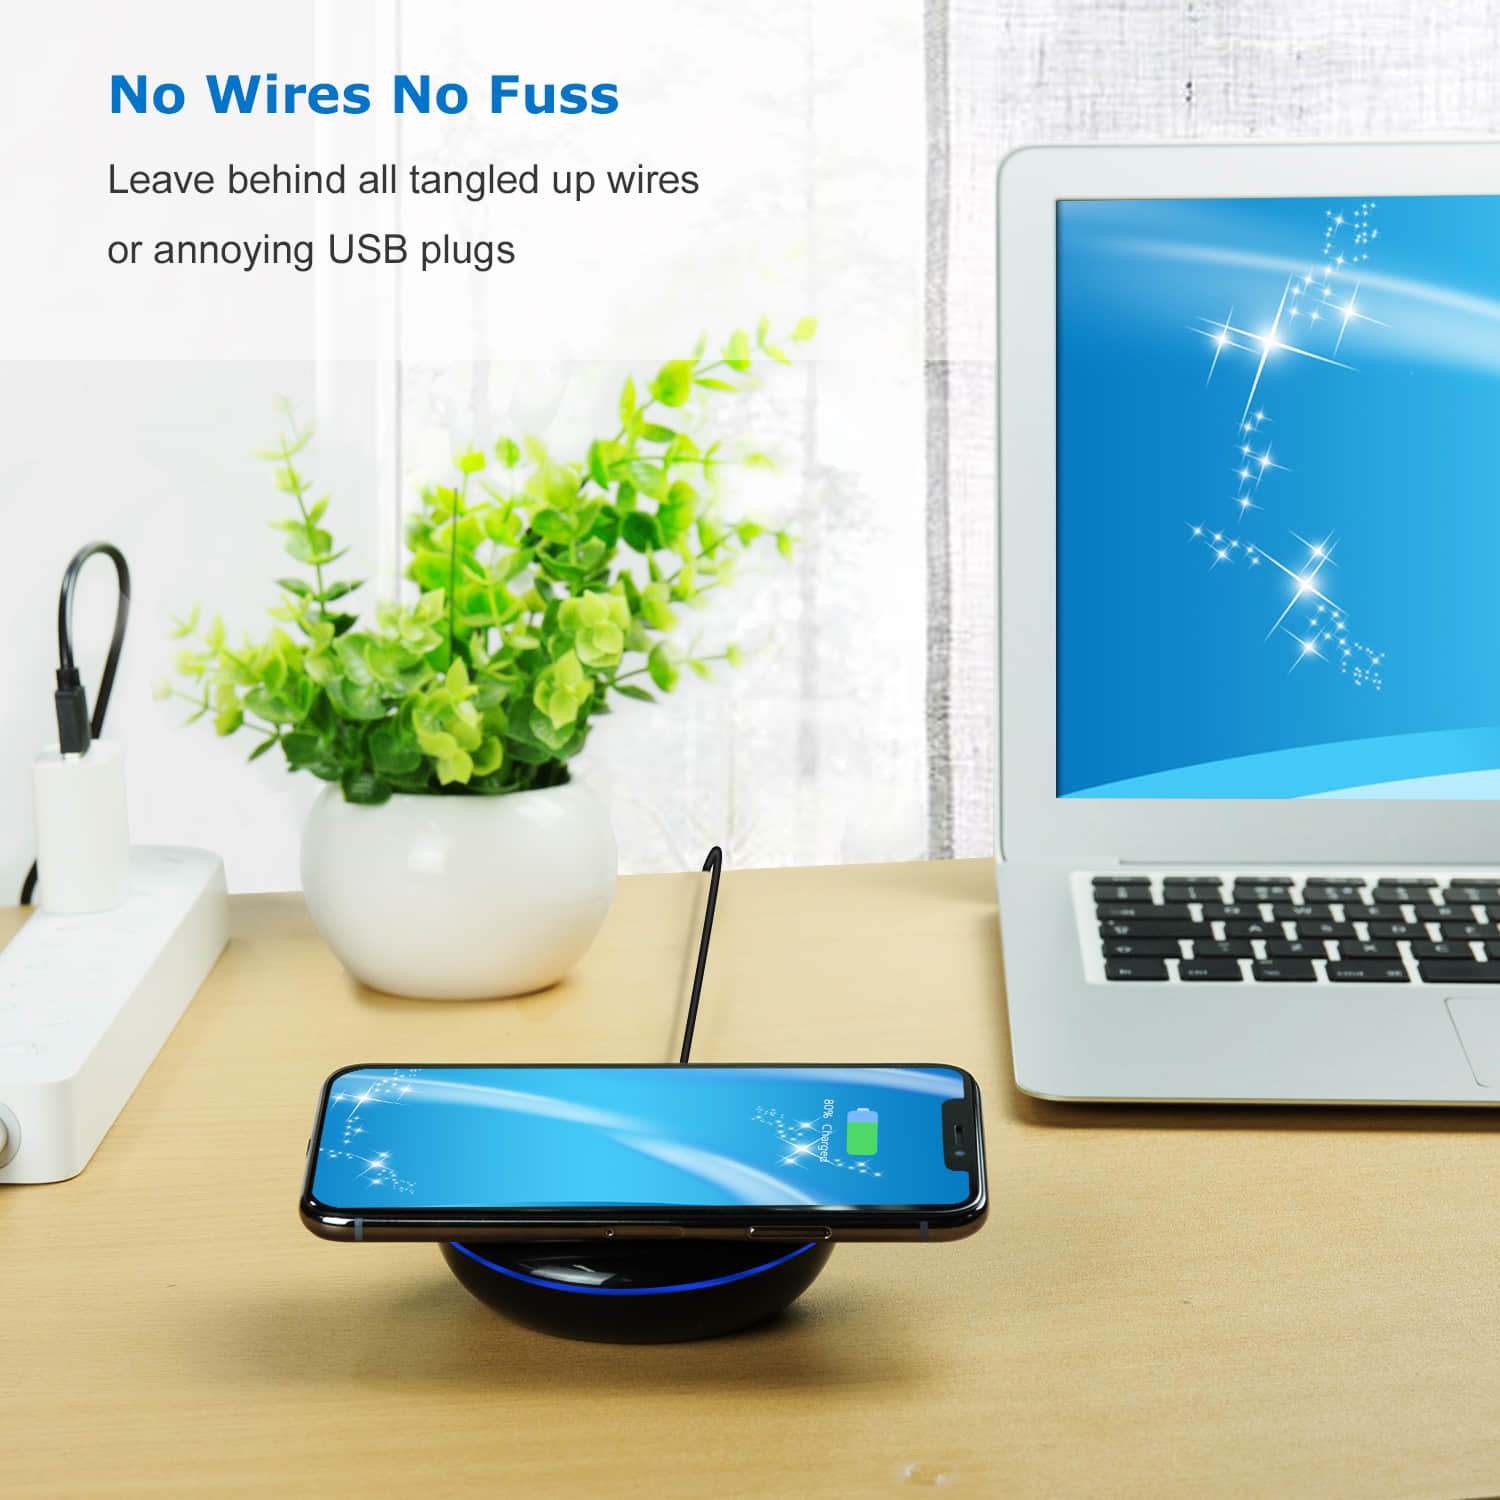 Wireless Charger for Samsung, Fast Wireless Charger,iPhone Wireless Charger,Wireless Charger for iPhone 8 plus,iPhone X,iPhone 8 and Samsung Galaxy S9,S8,S7,S5,S6